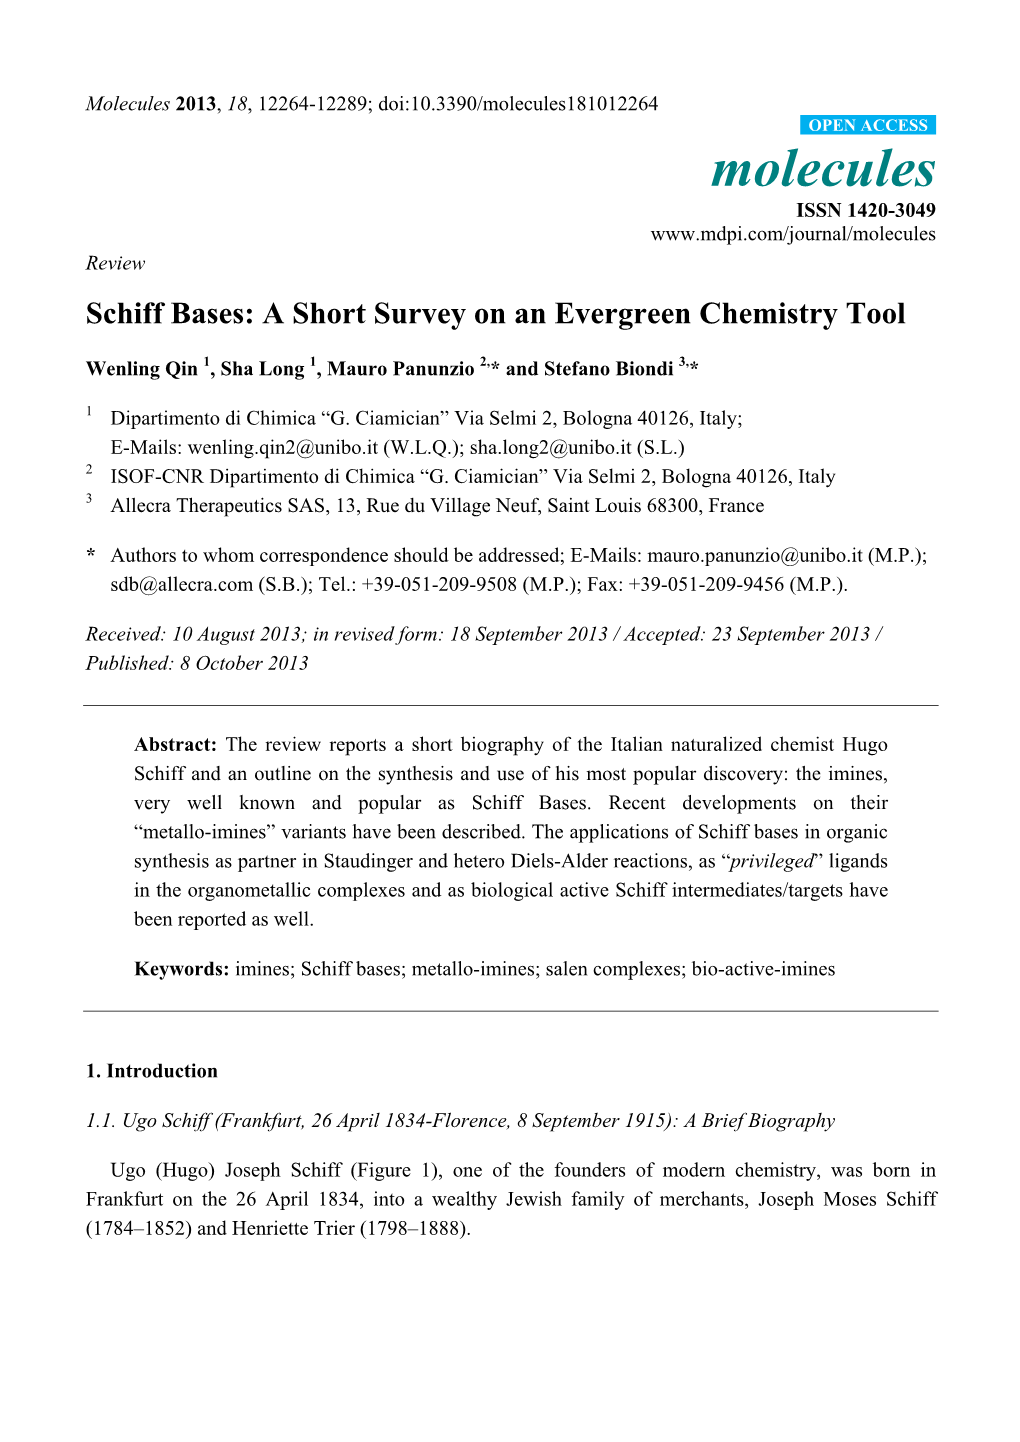 Schiff Bases: a Short Survey on an Evergreen Chemistry Tool